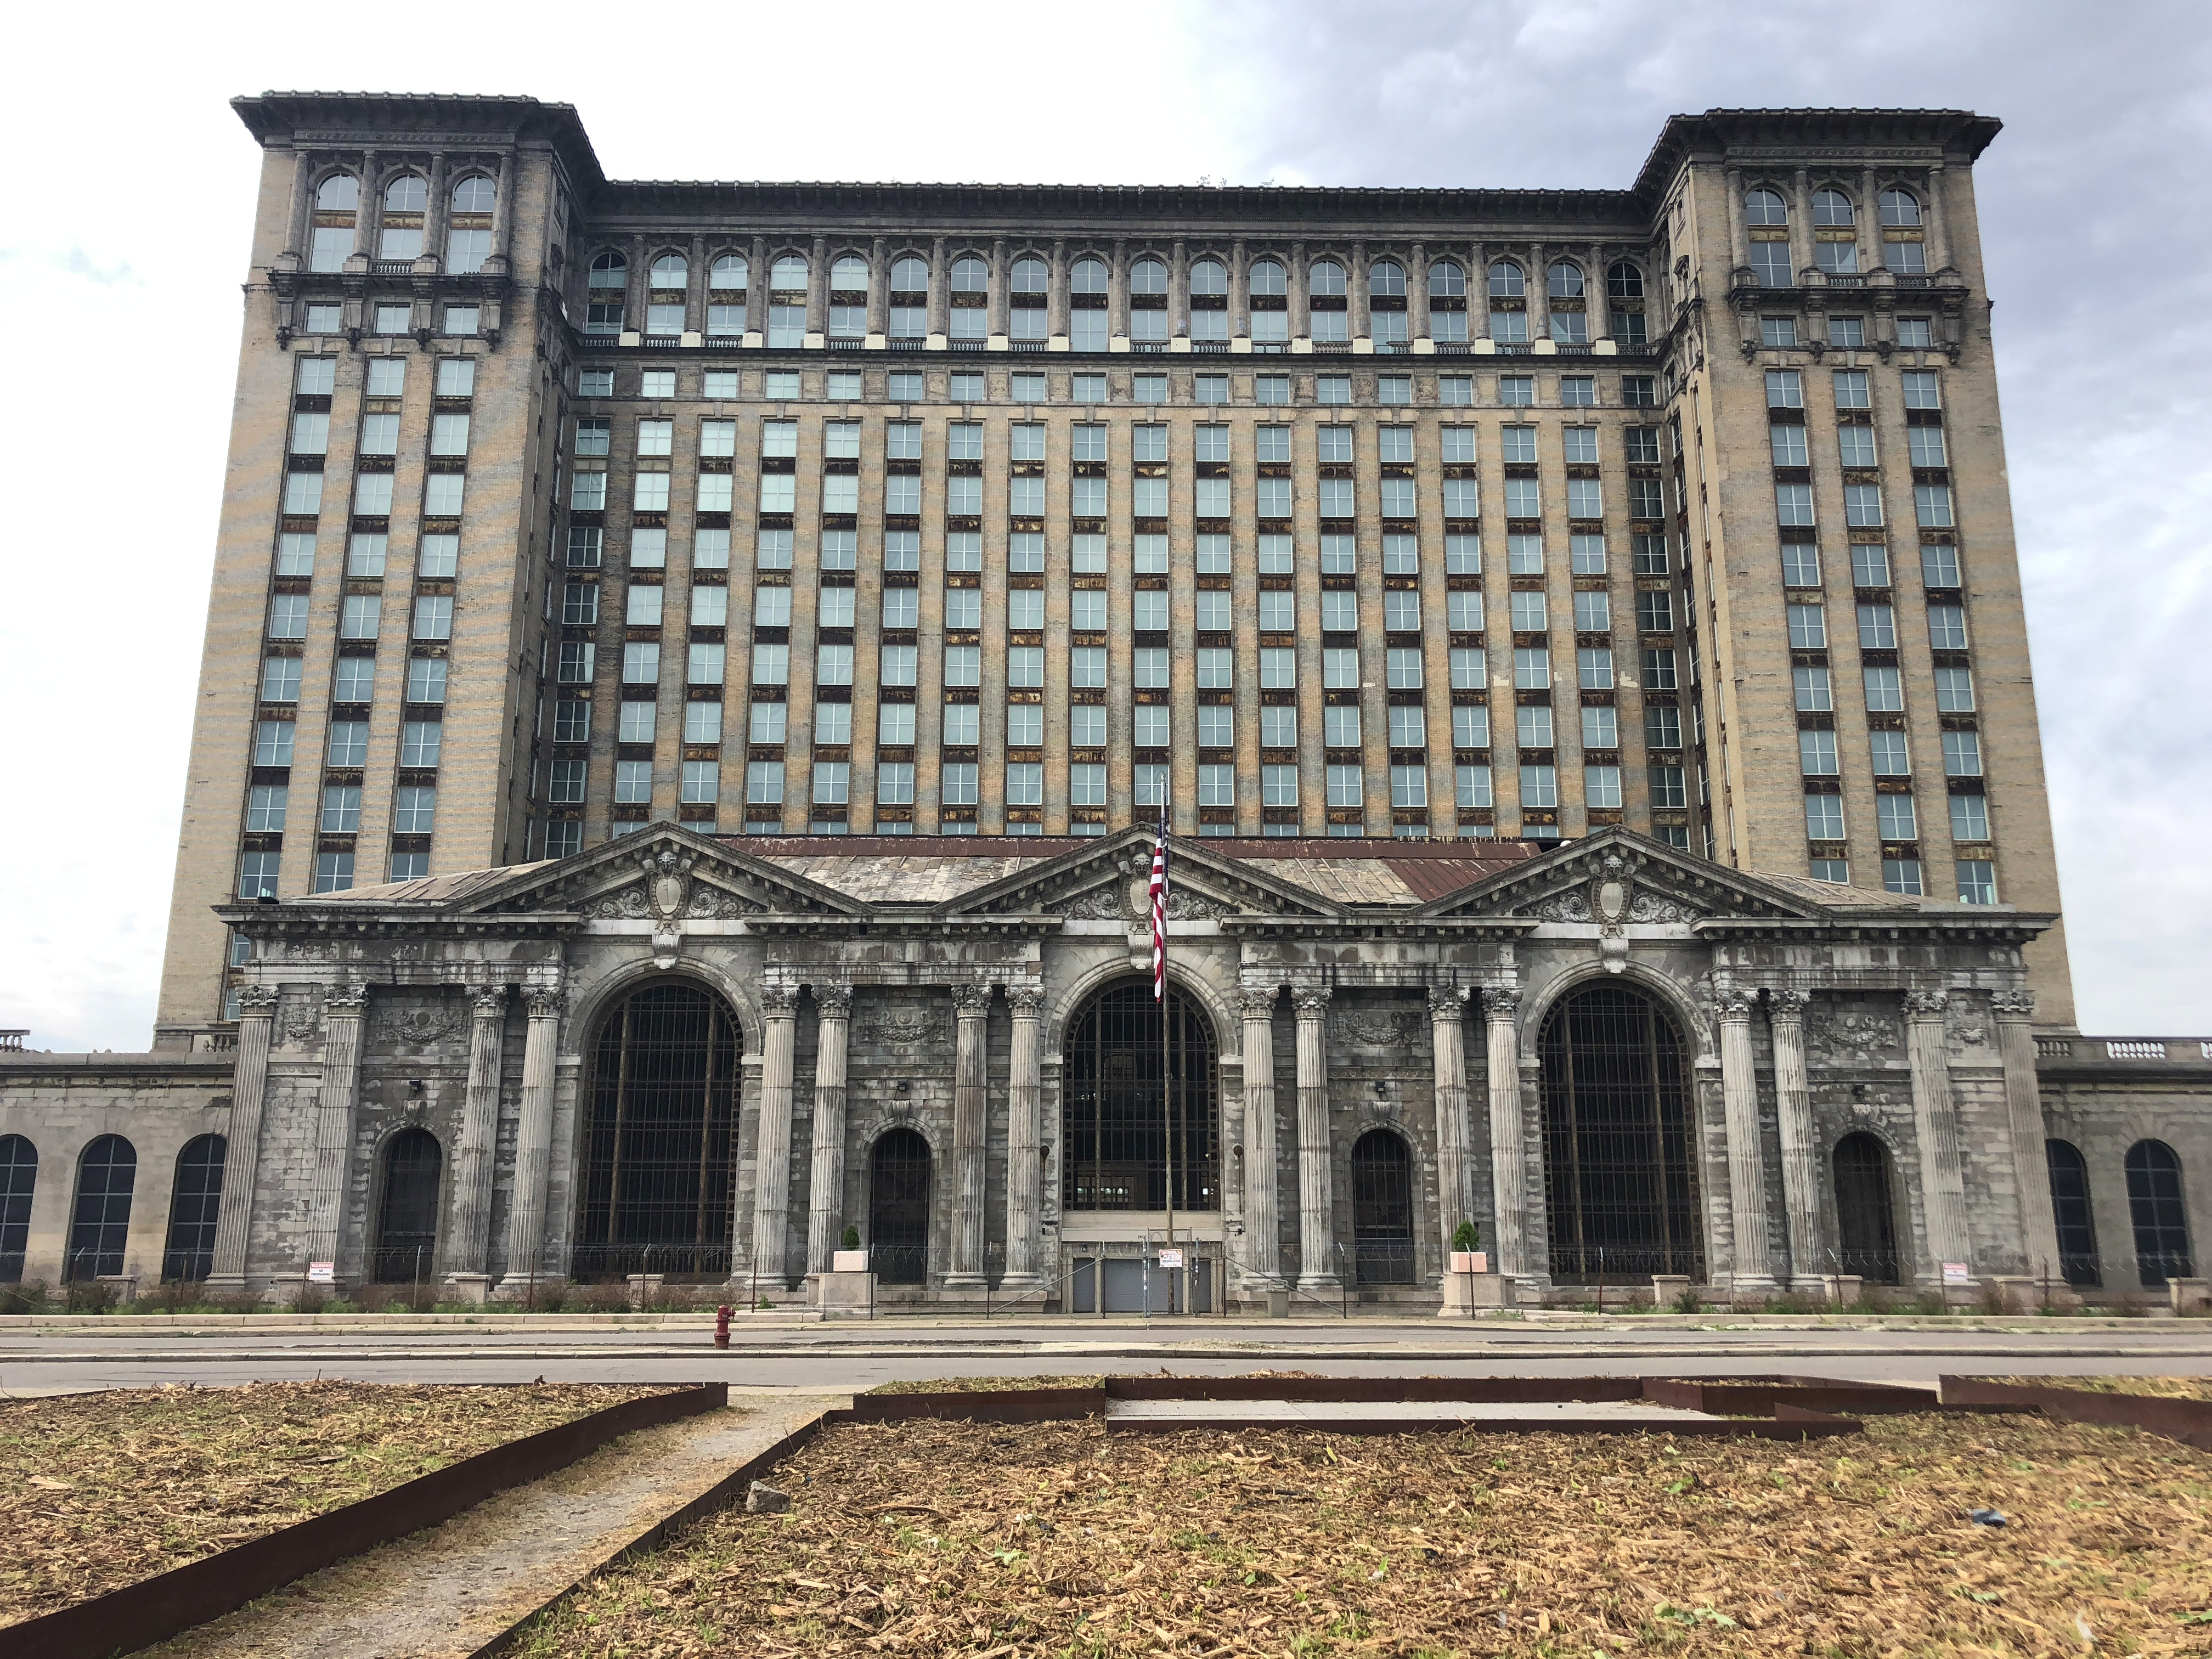 Photo of Michigan Central Station taken by Sarah Williams for her award-winning story: "Hope has not left the station."